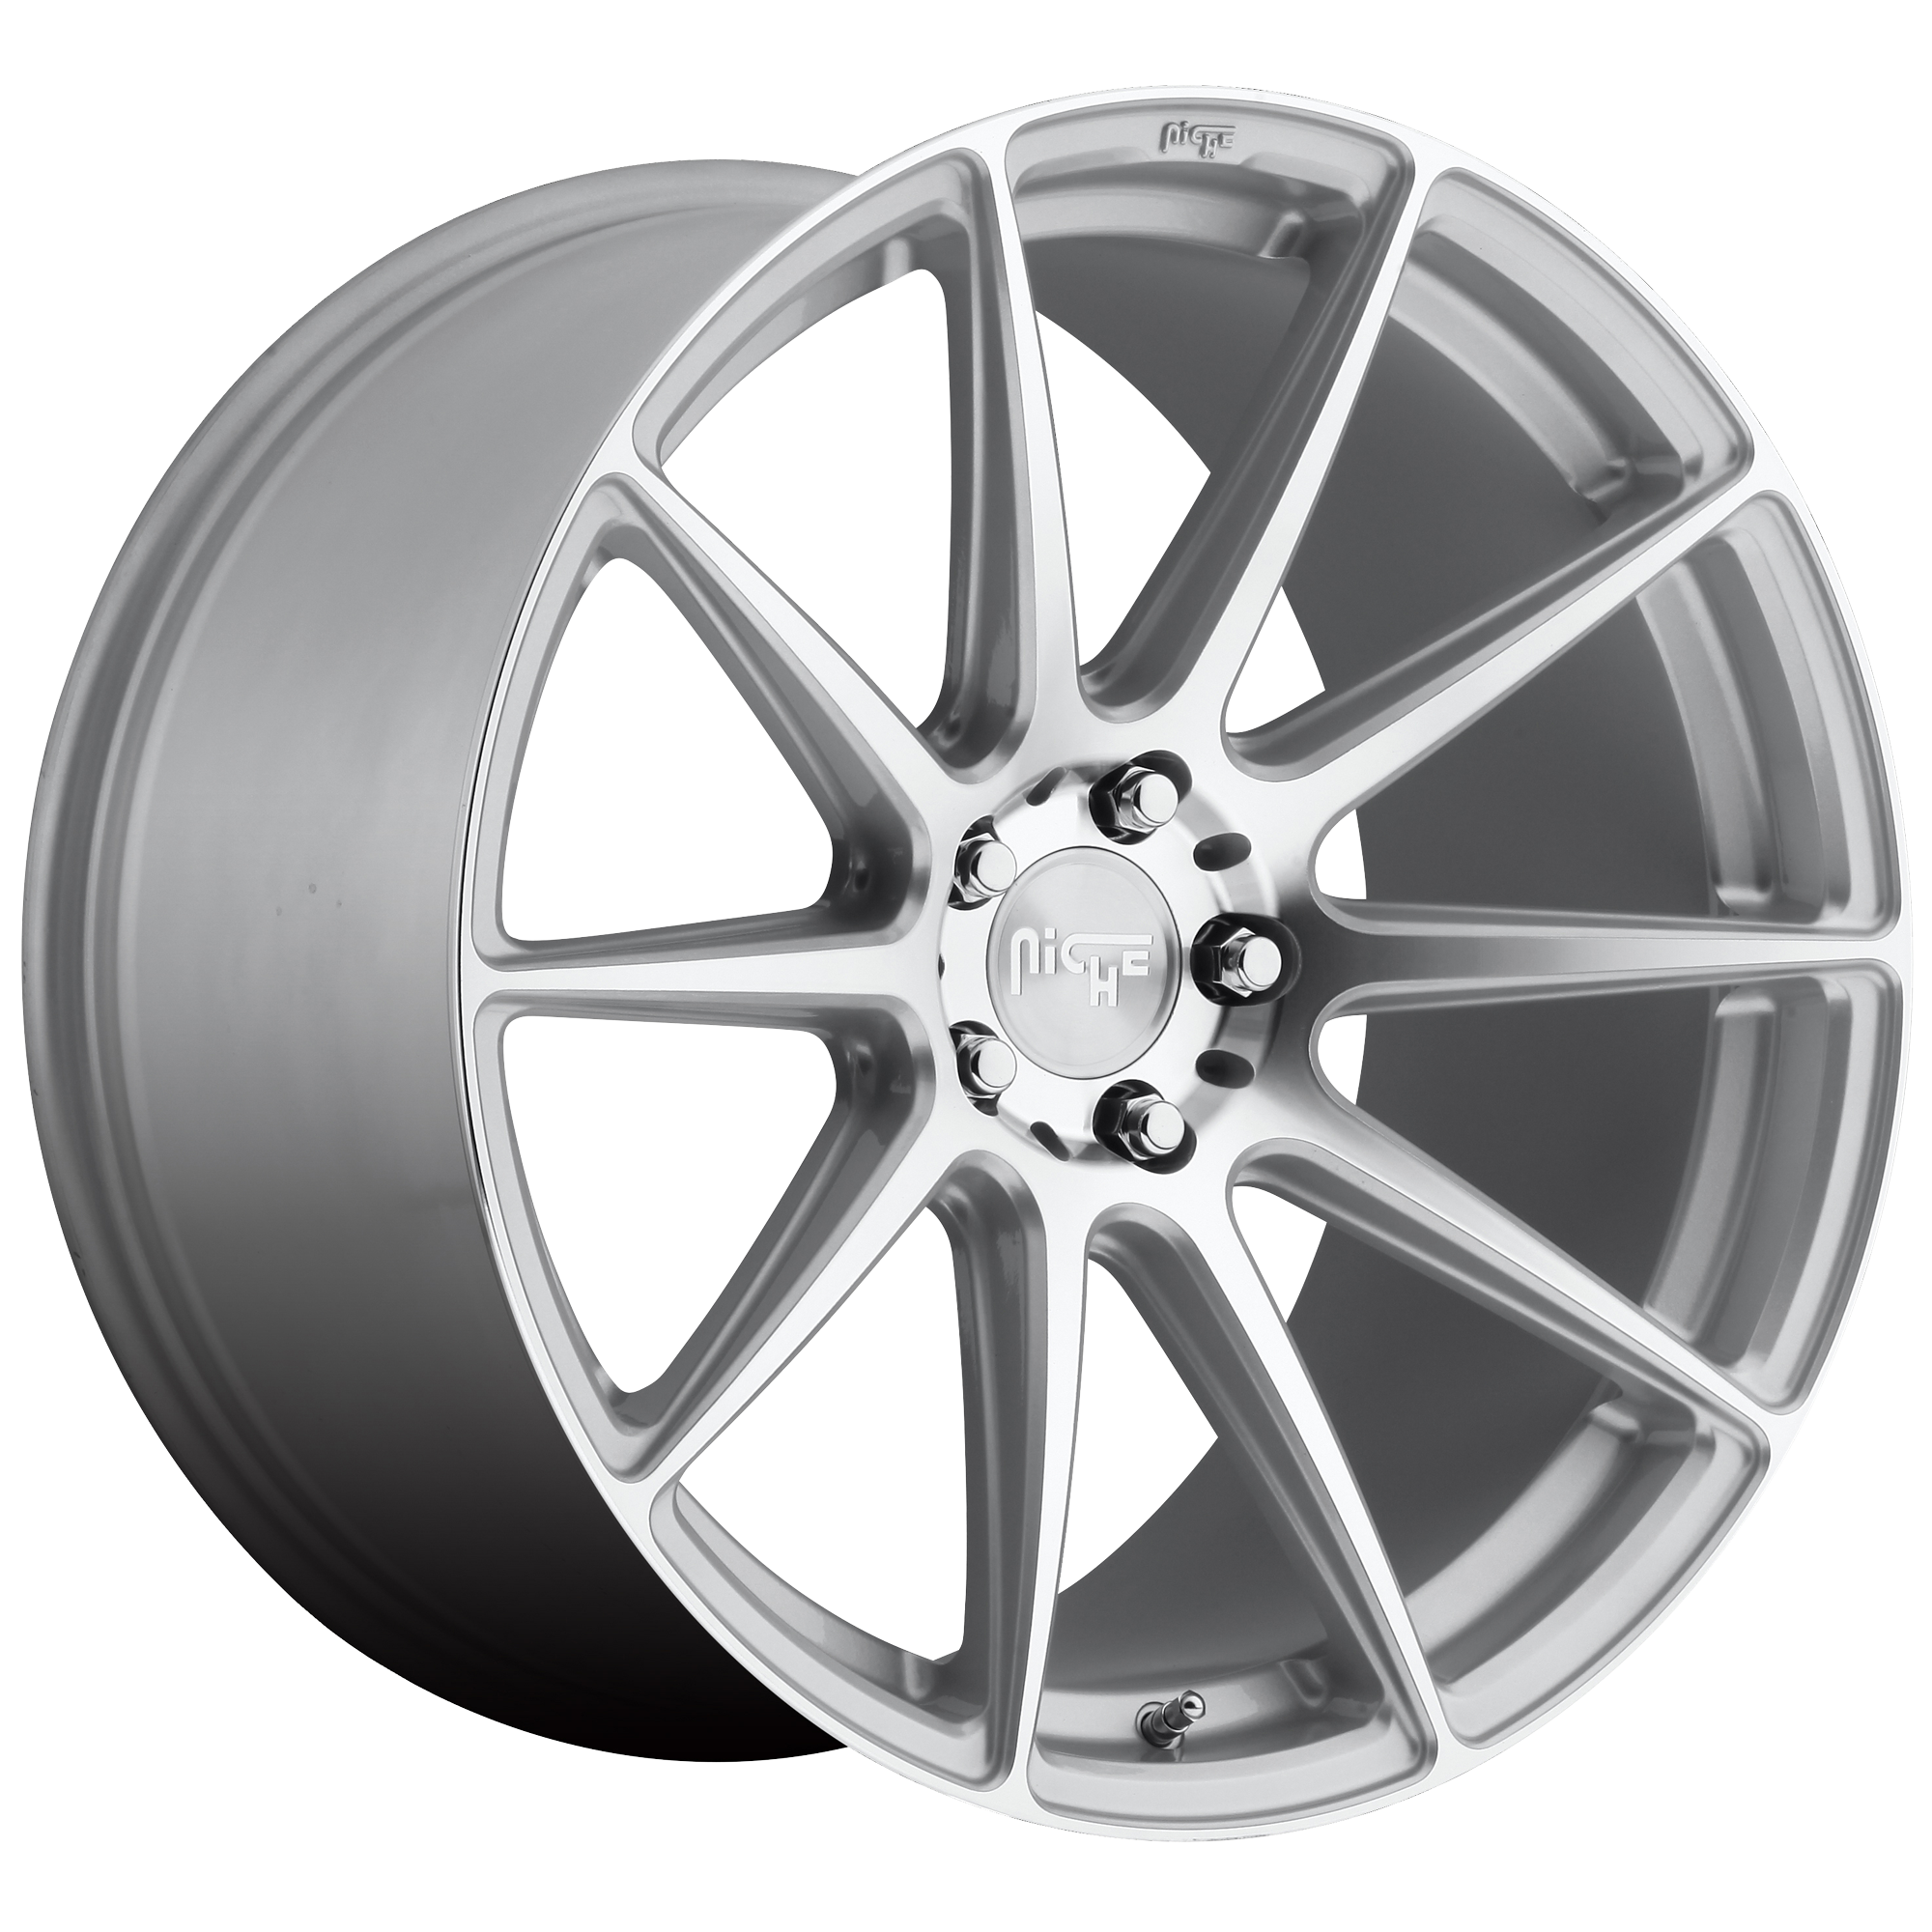 ESSEN 20x10 5x114.30 GLOSS SILVER MACHINED (40 mm) - Tires and Engine Performance